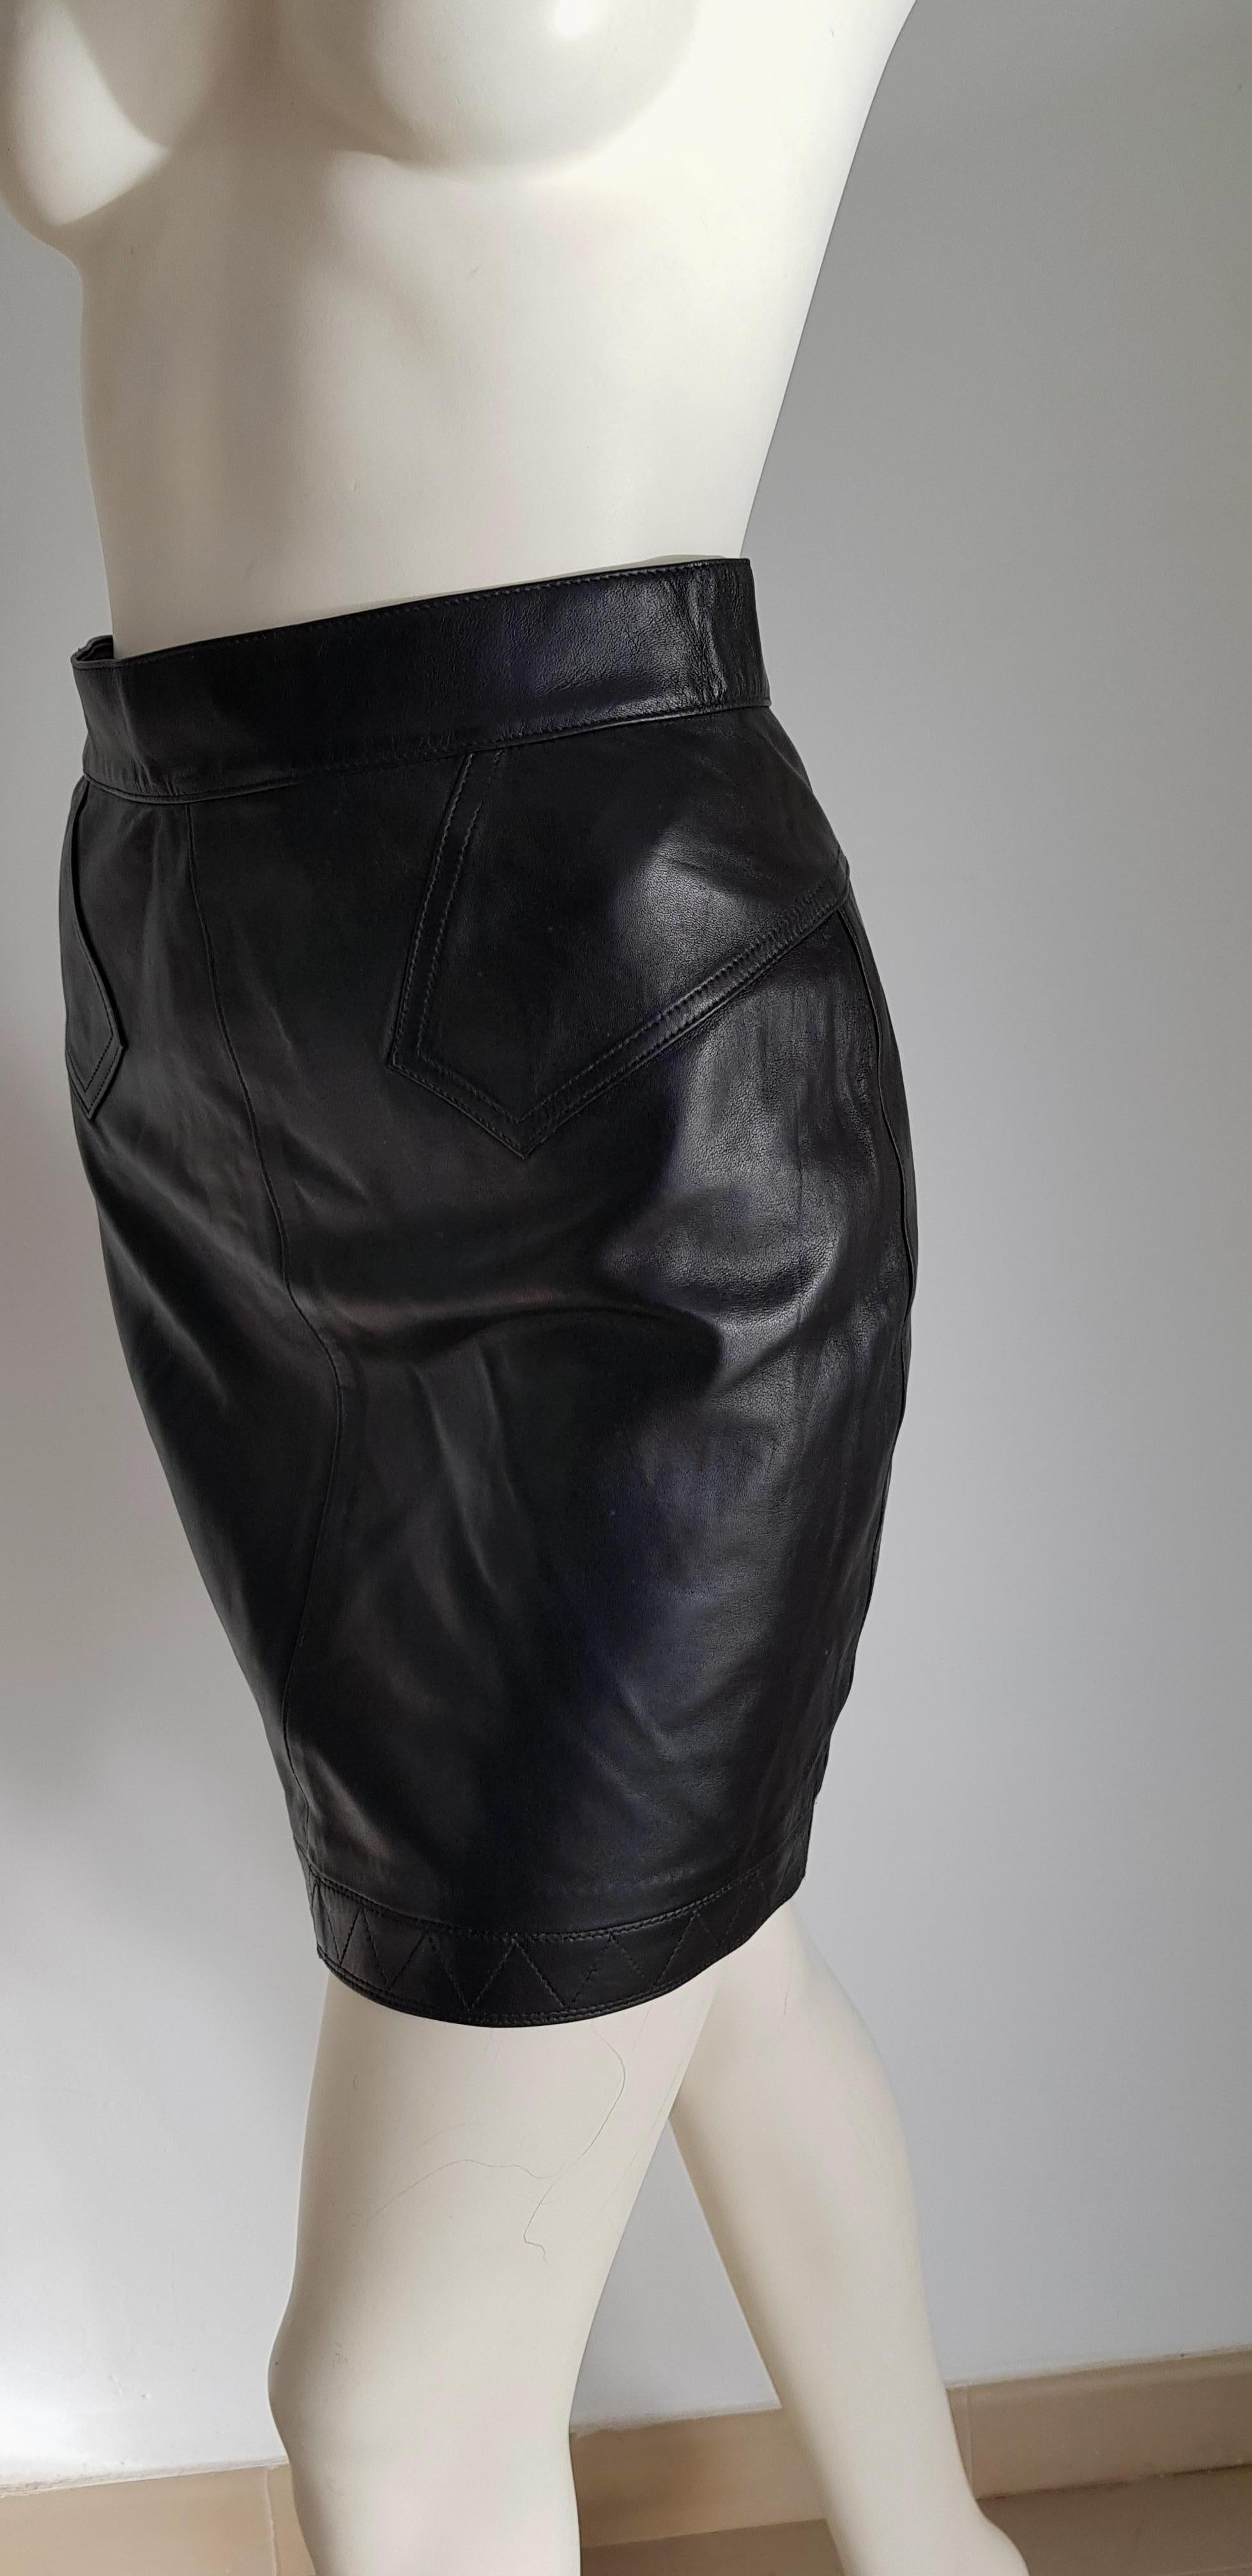 ALAIA black leather mini skirt - Unworn, New.

SIZE: lenght 46, waist circumference 72, hip circumference 96. 
TO CONVERT: cm x 0.39 = inch.
Measurements provided as a courtesy only, not a guarantee of fit. 
By 